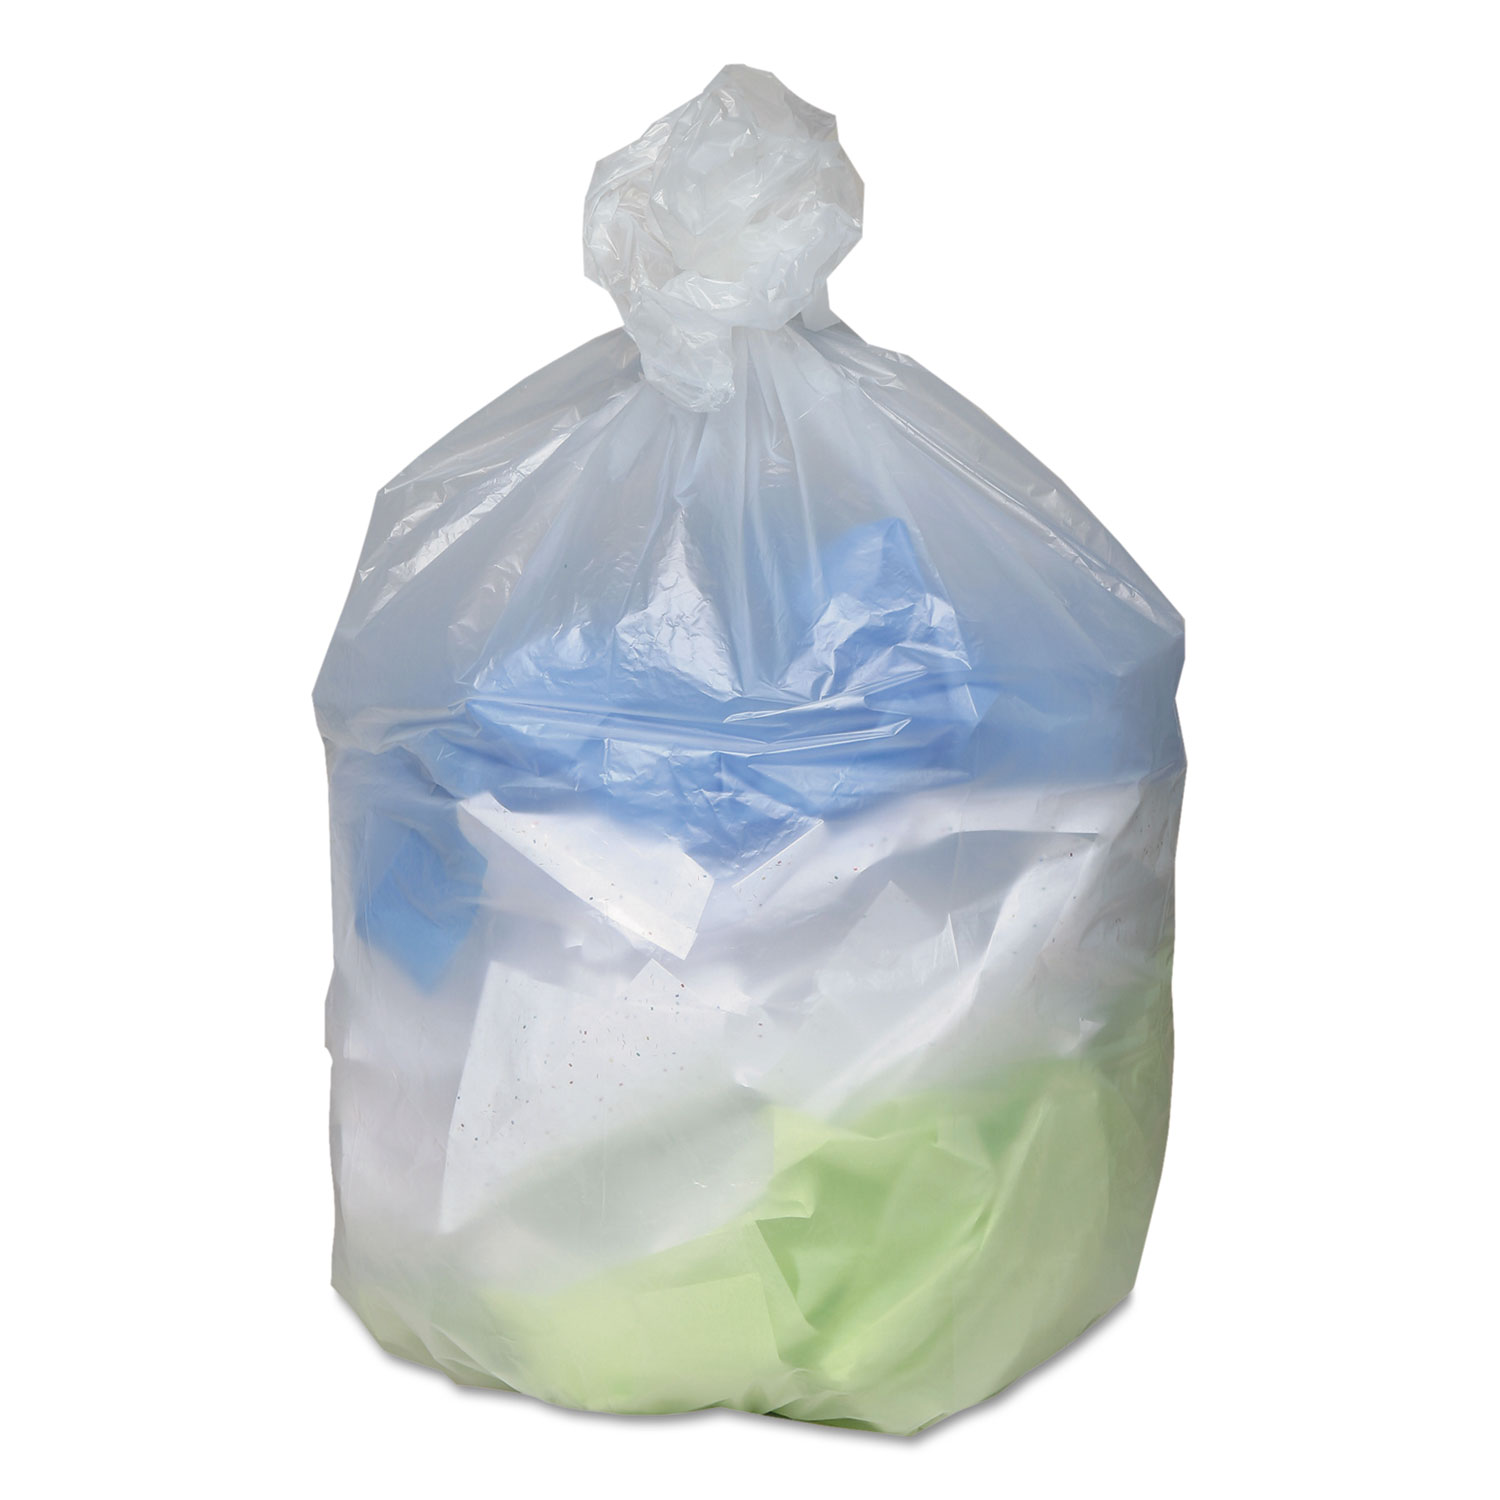 Yocup Company: RY 33 Gallon Clear 0.48 Mil 33 x 40 Can Liner / Trash Bag  - 1 case (500 piece)